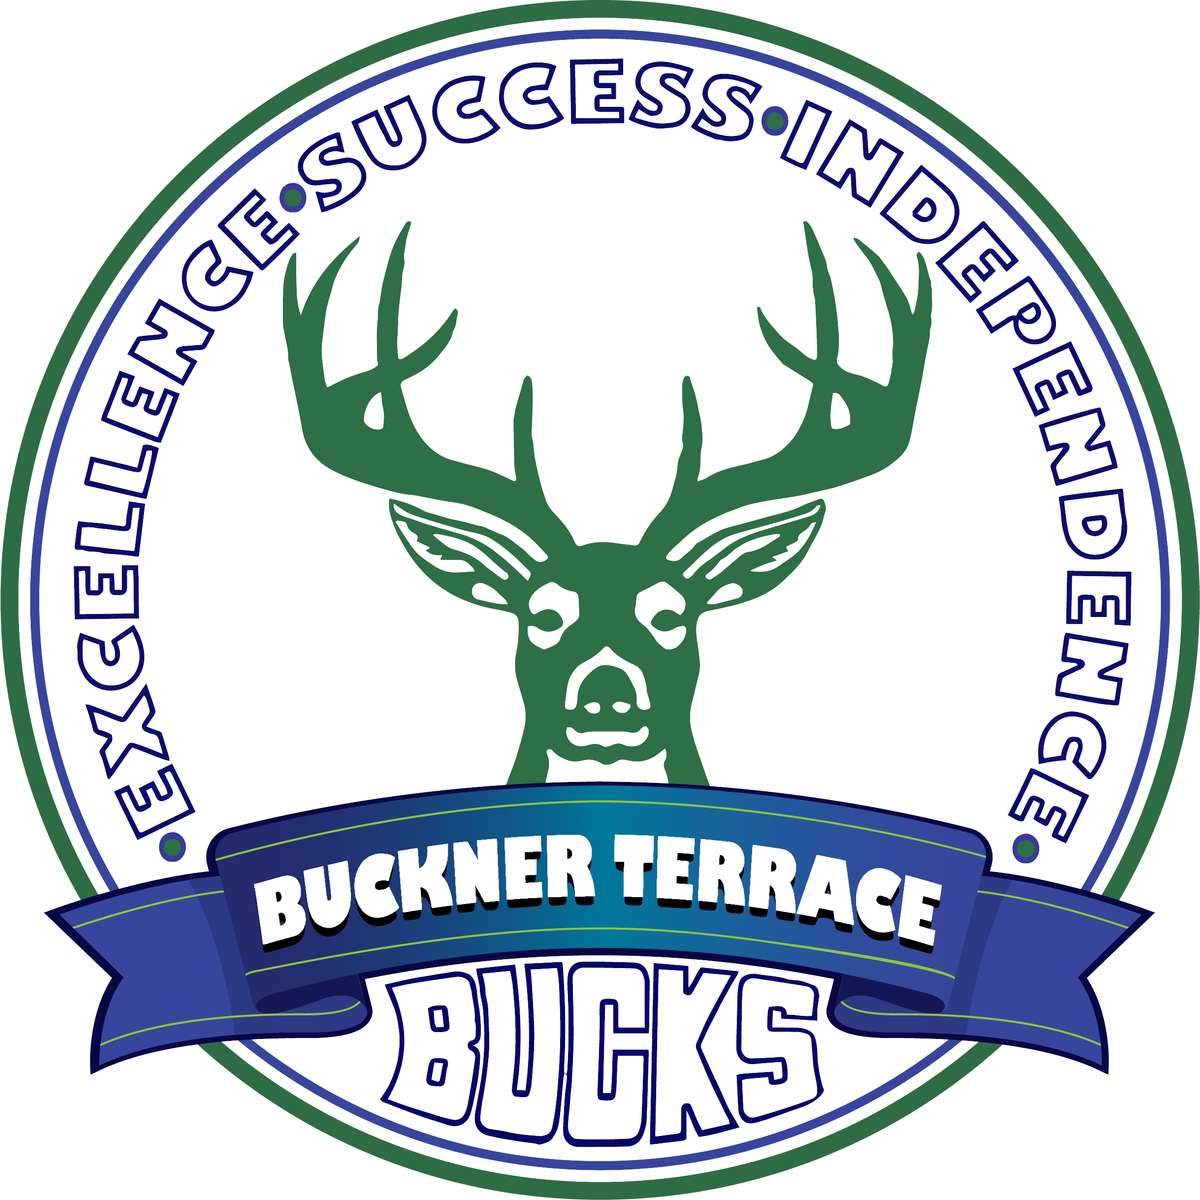 Buckner Terrace puzzle online from photo